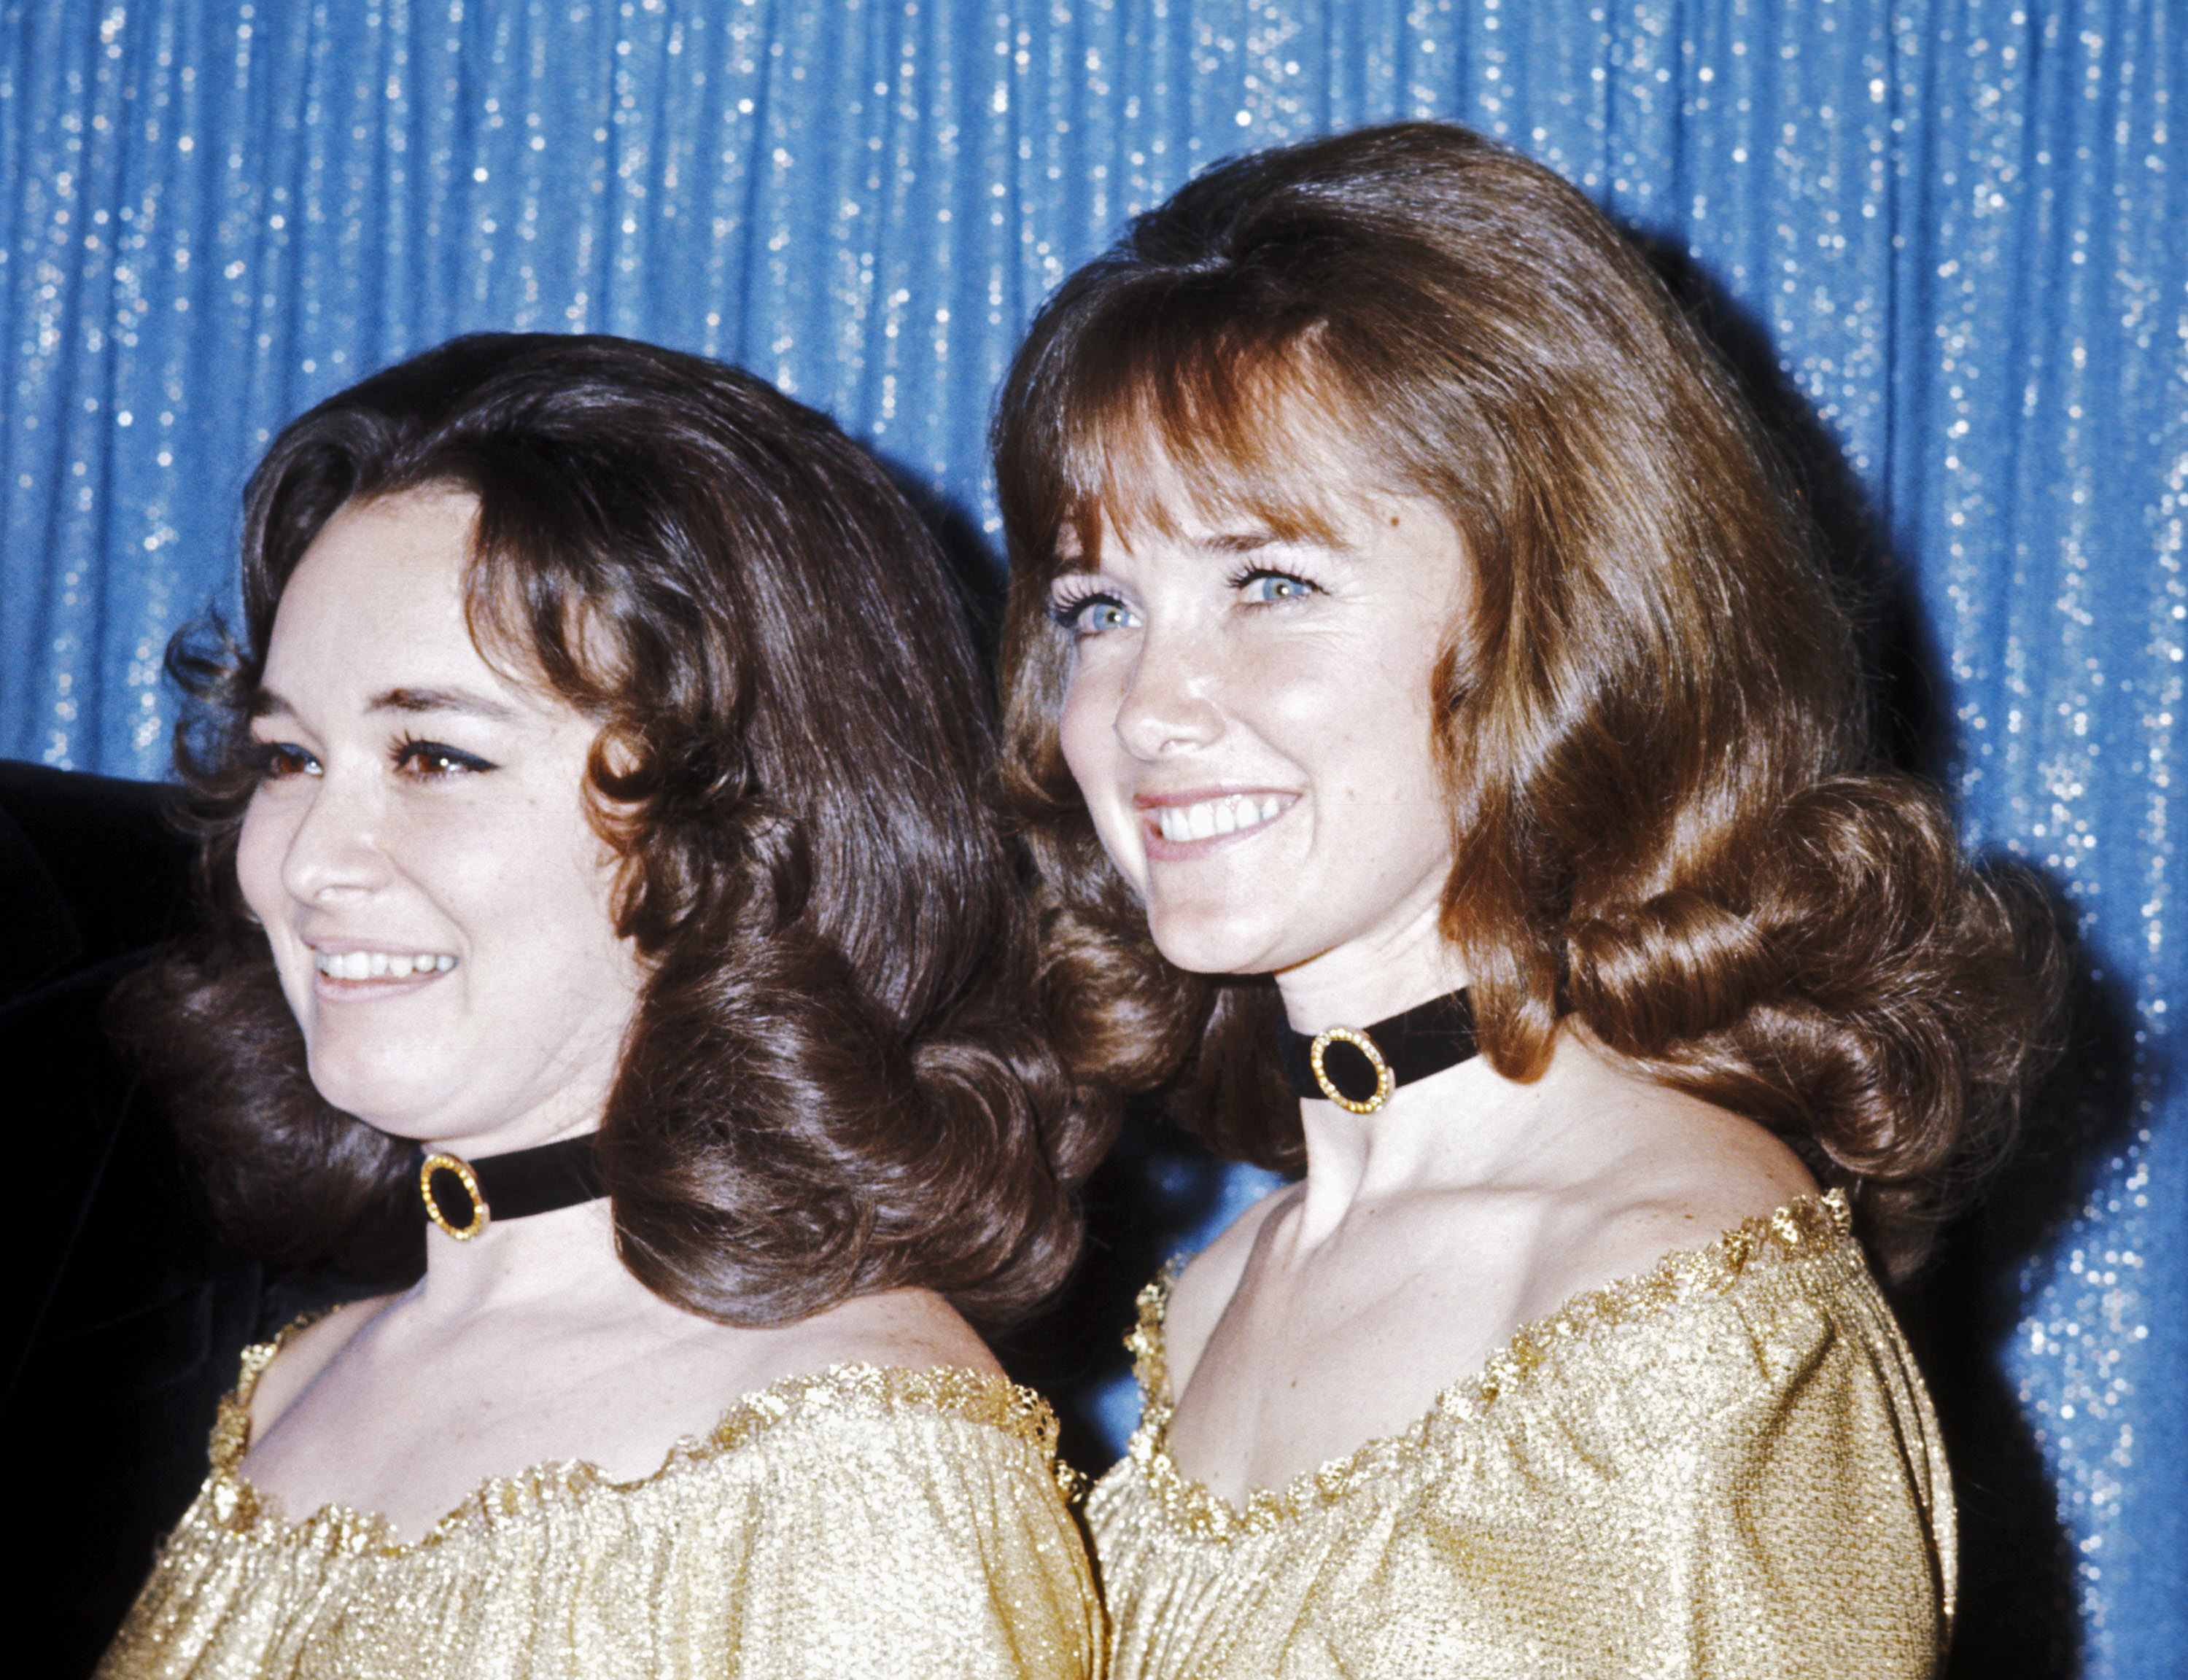 Peggy and Dianne Lennon at the 23rd Annual Primetime Emmy Awards in Hollywood, 1971 | Source: Getty Images